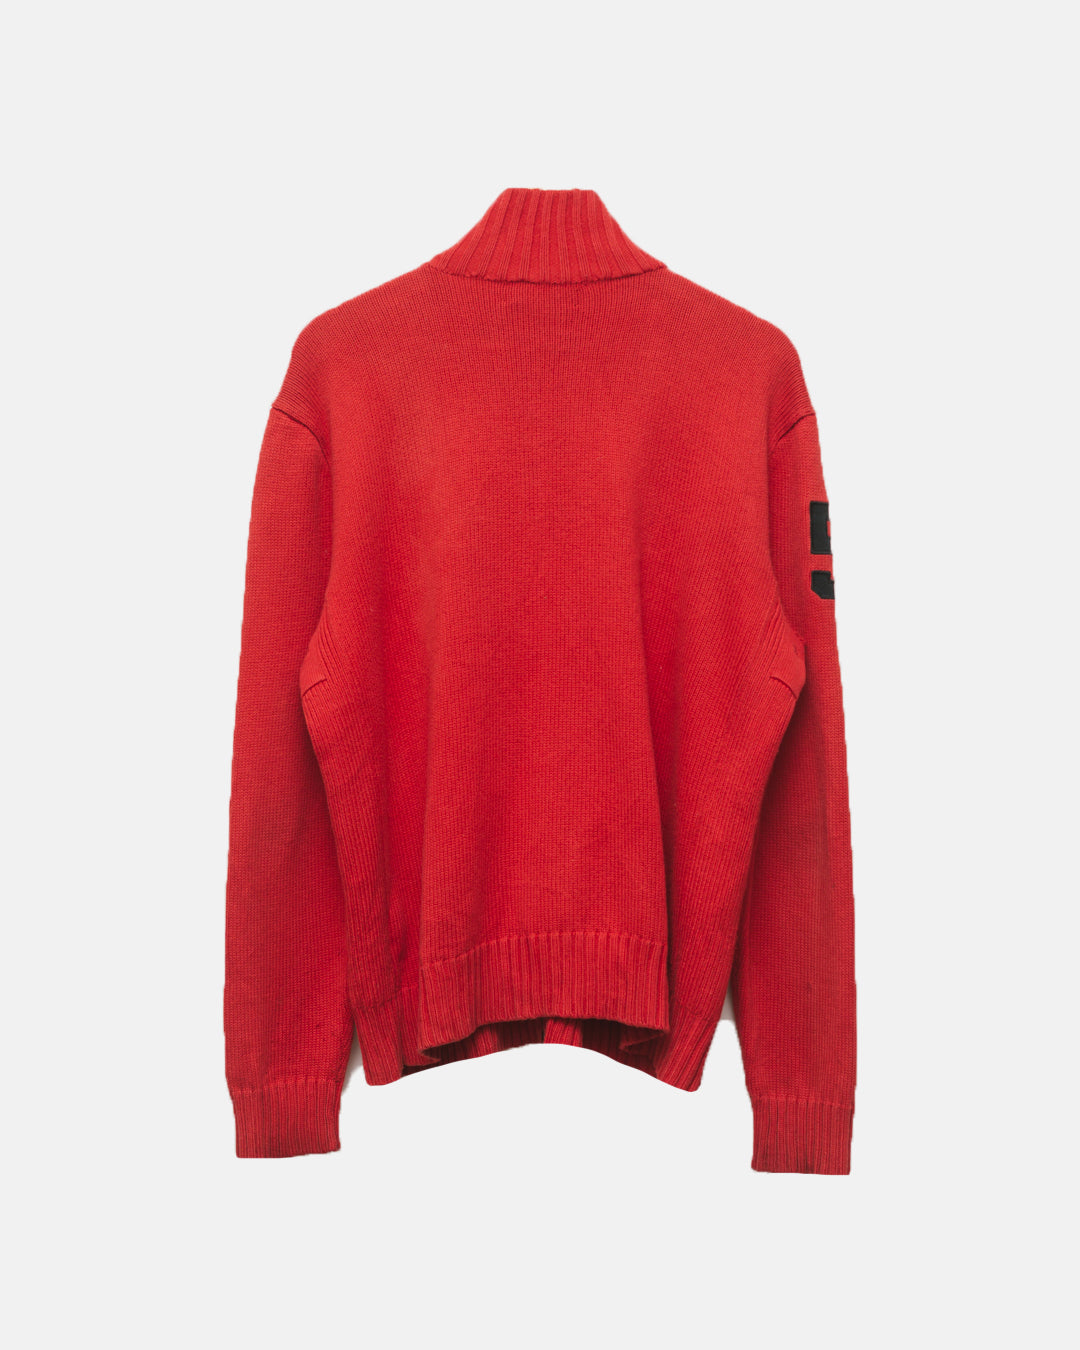 Polo by ralph lauren knit zip up cardigan